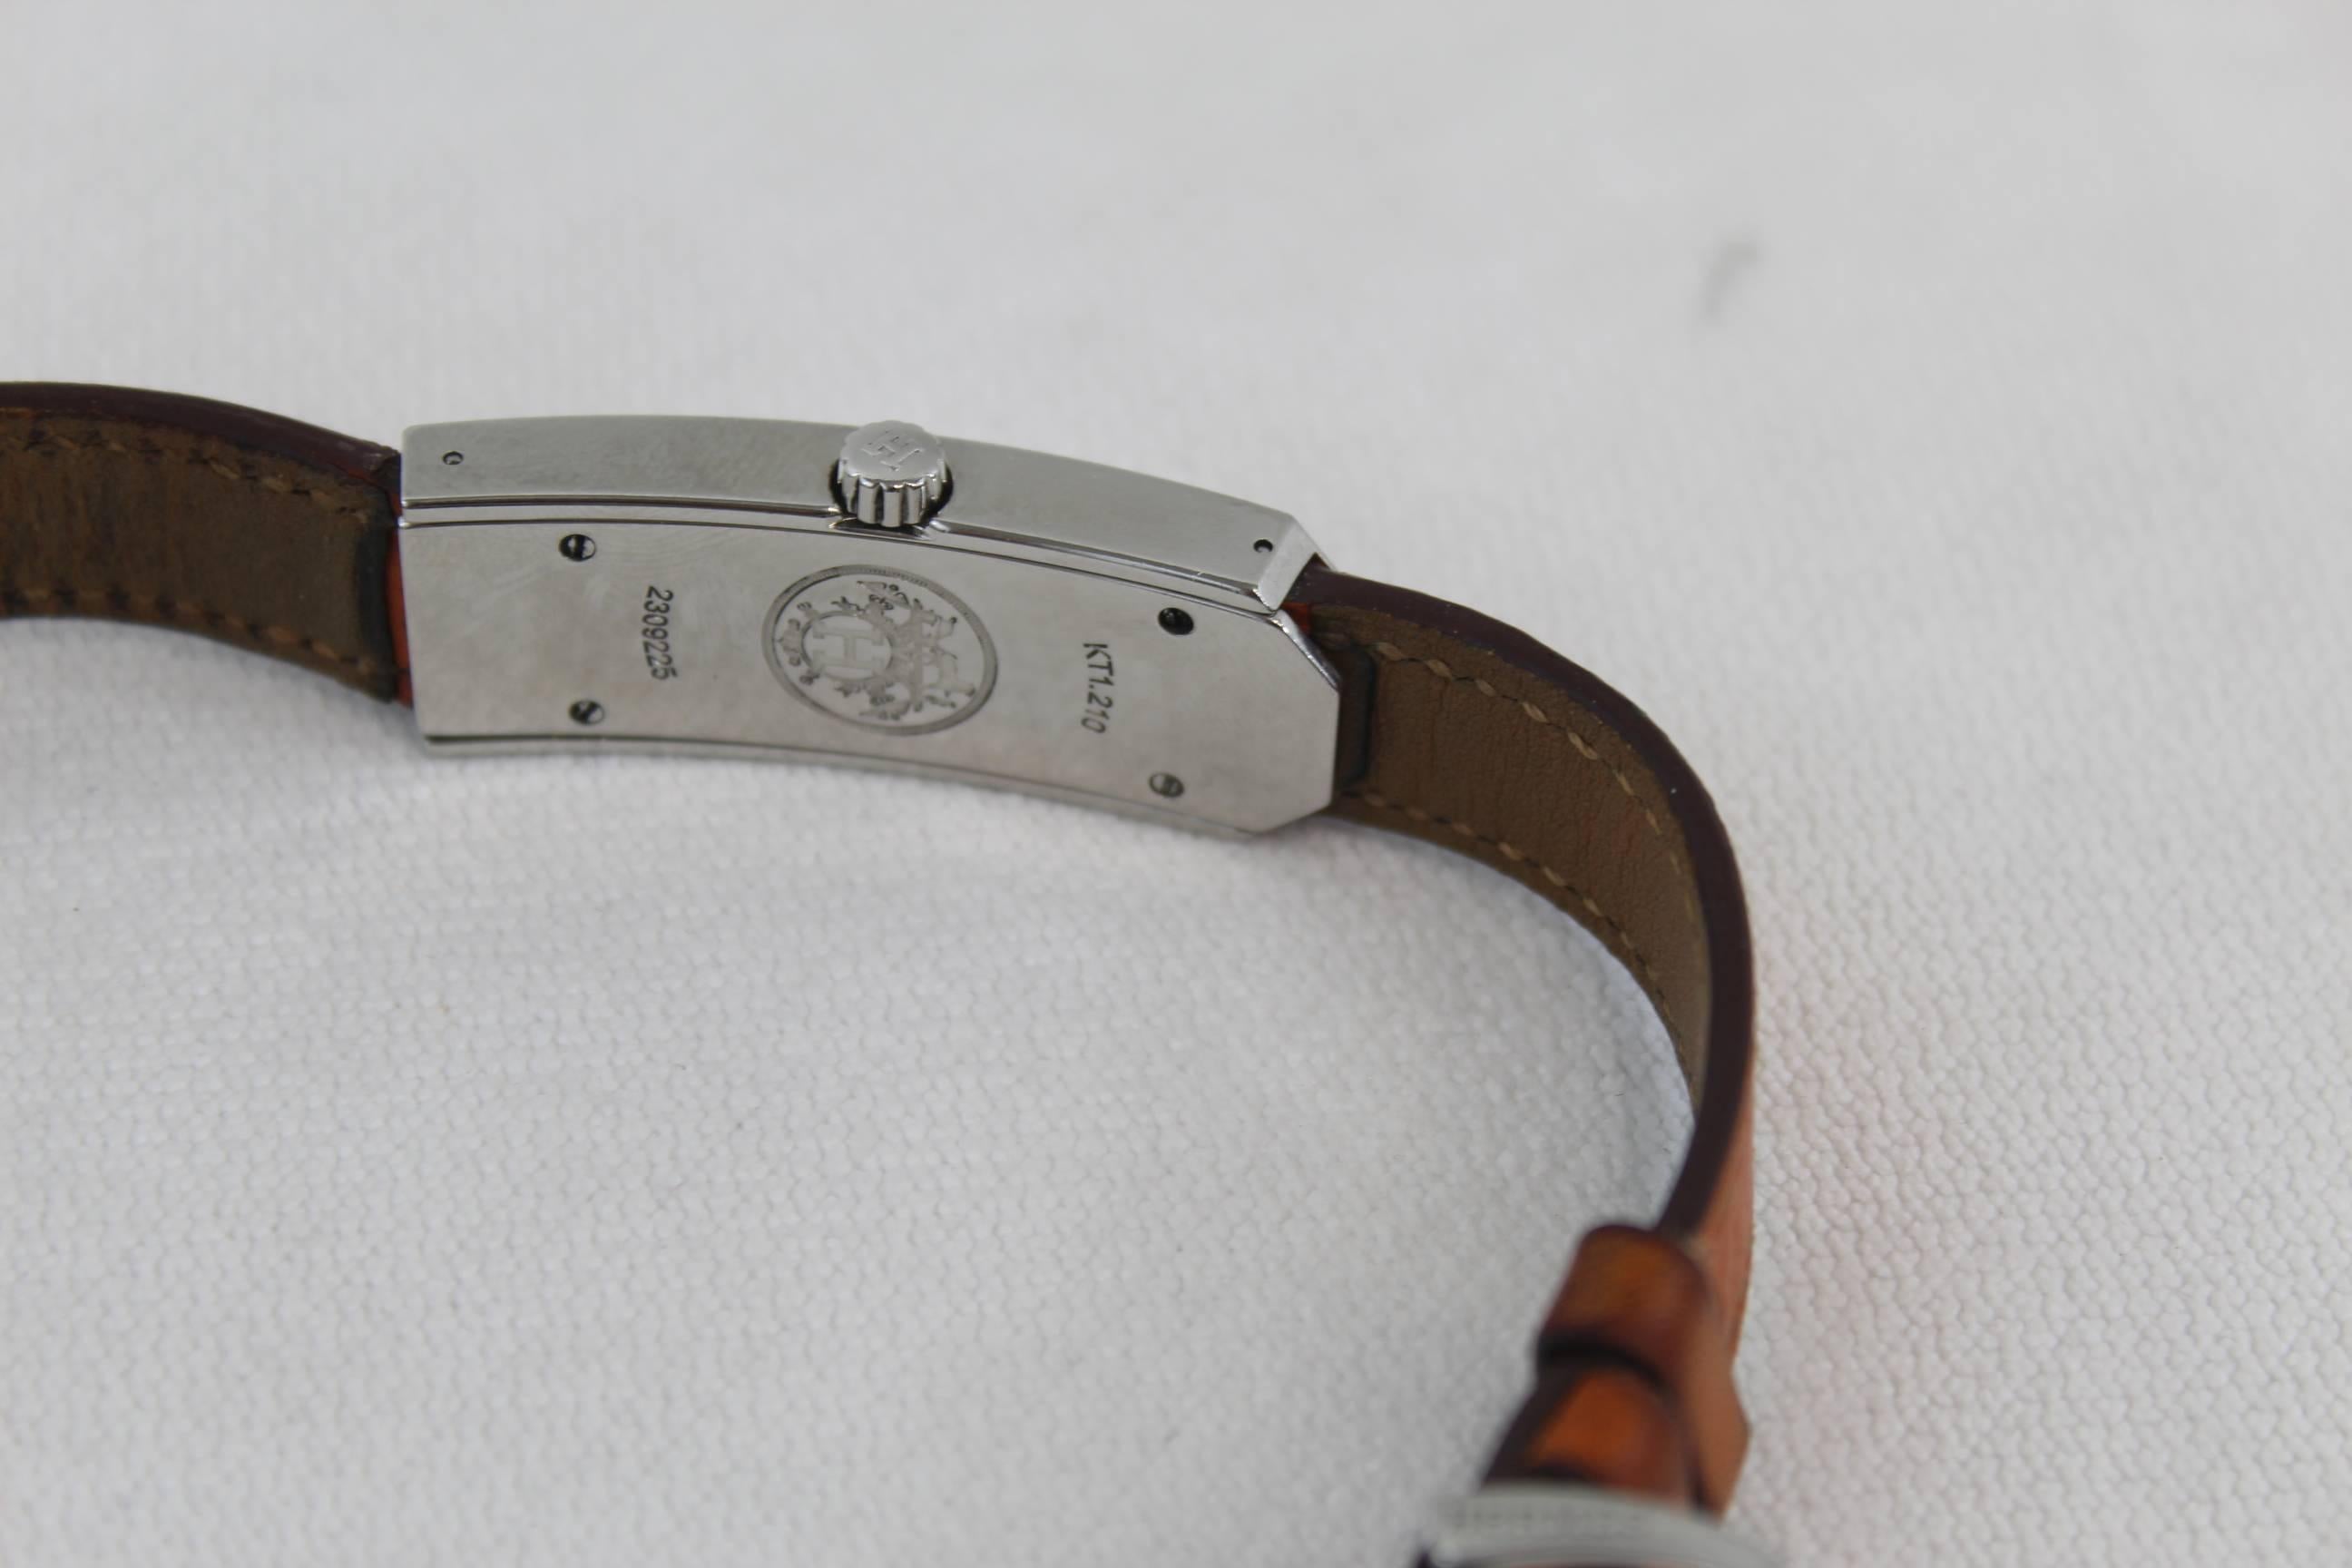 Nice watch from hermes, model Kelly 2 representing the locker from the Kelly bag.

Watch in average condition, band has some cracking, price takes that into account
Case in good condition but it has some slight signs of wearscratches